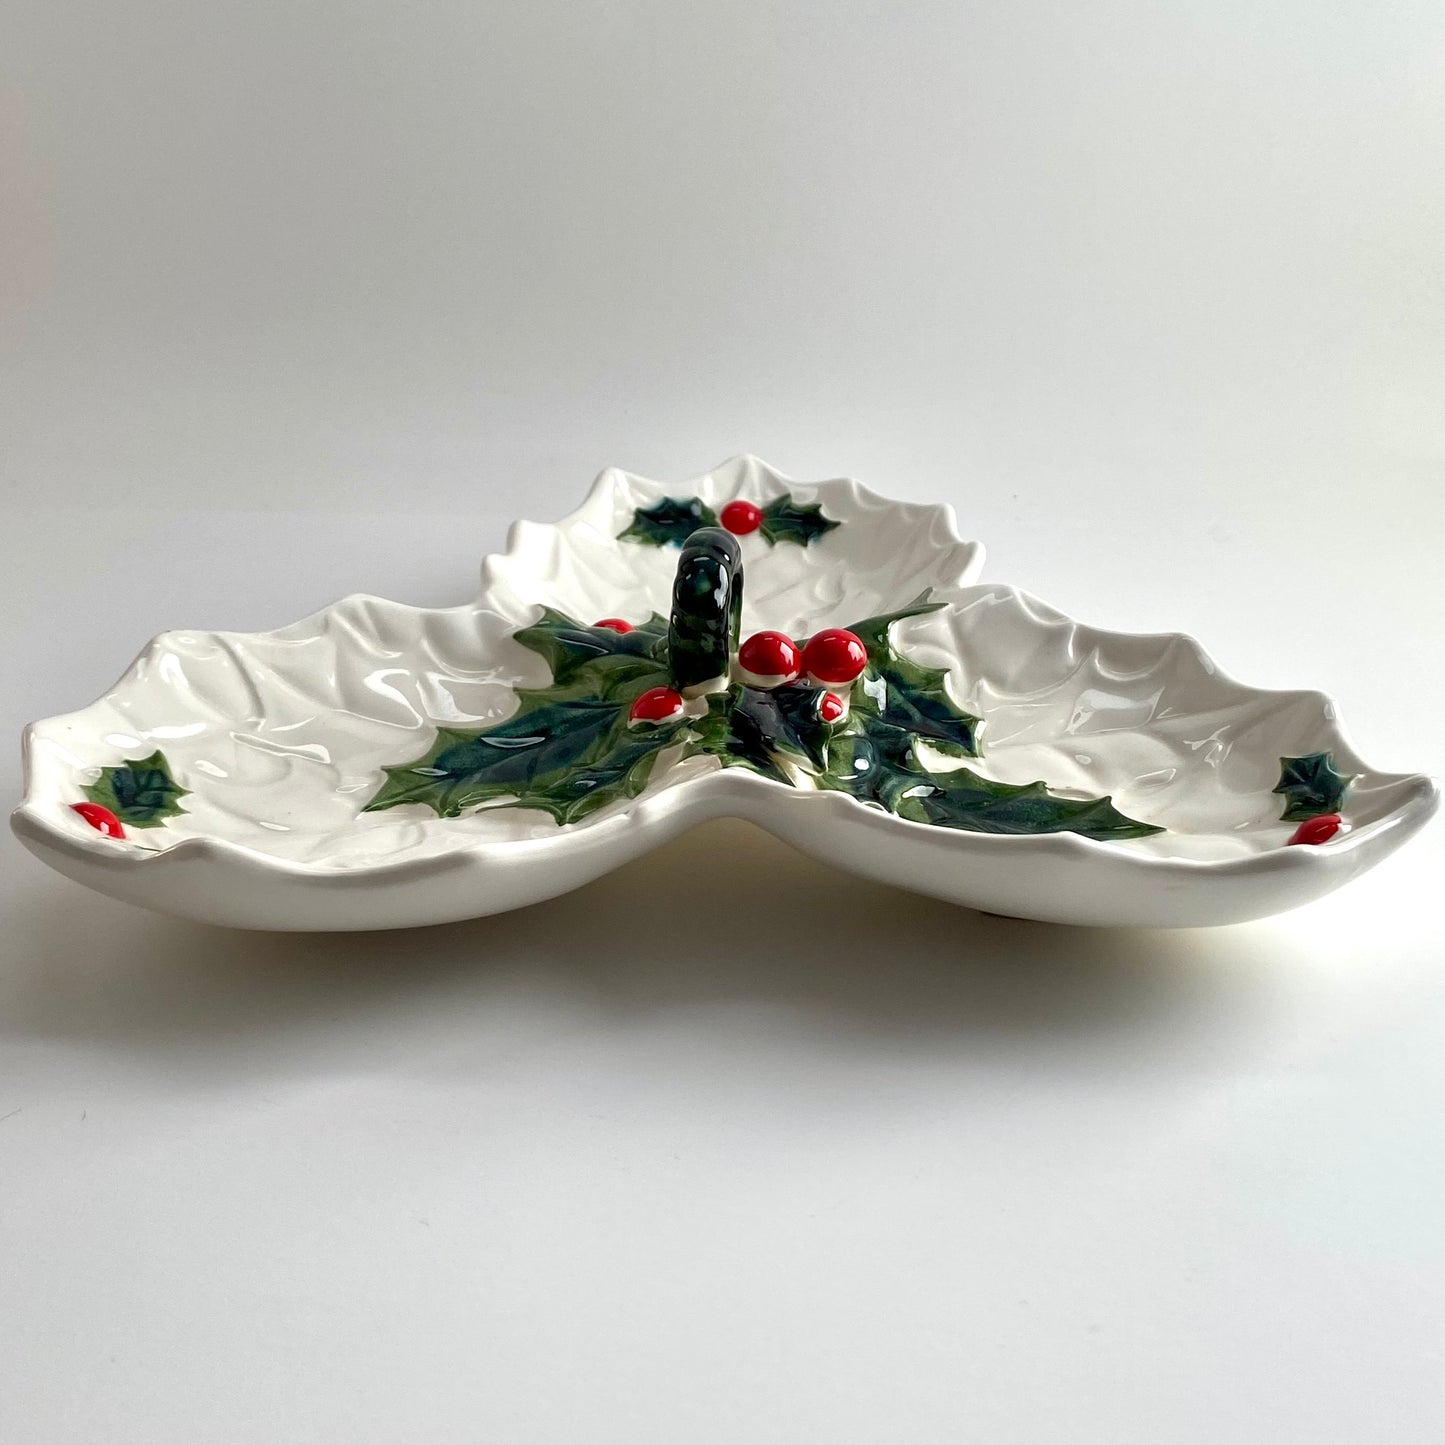 1970-1971 Lefton Made in Japan Divided Holiday Dish